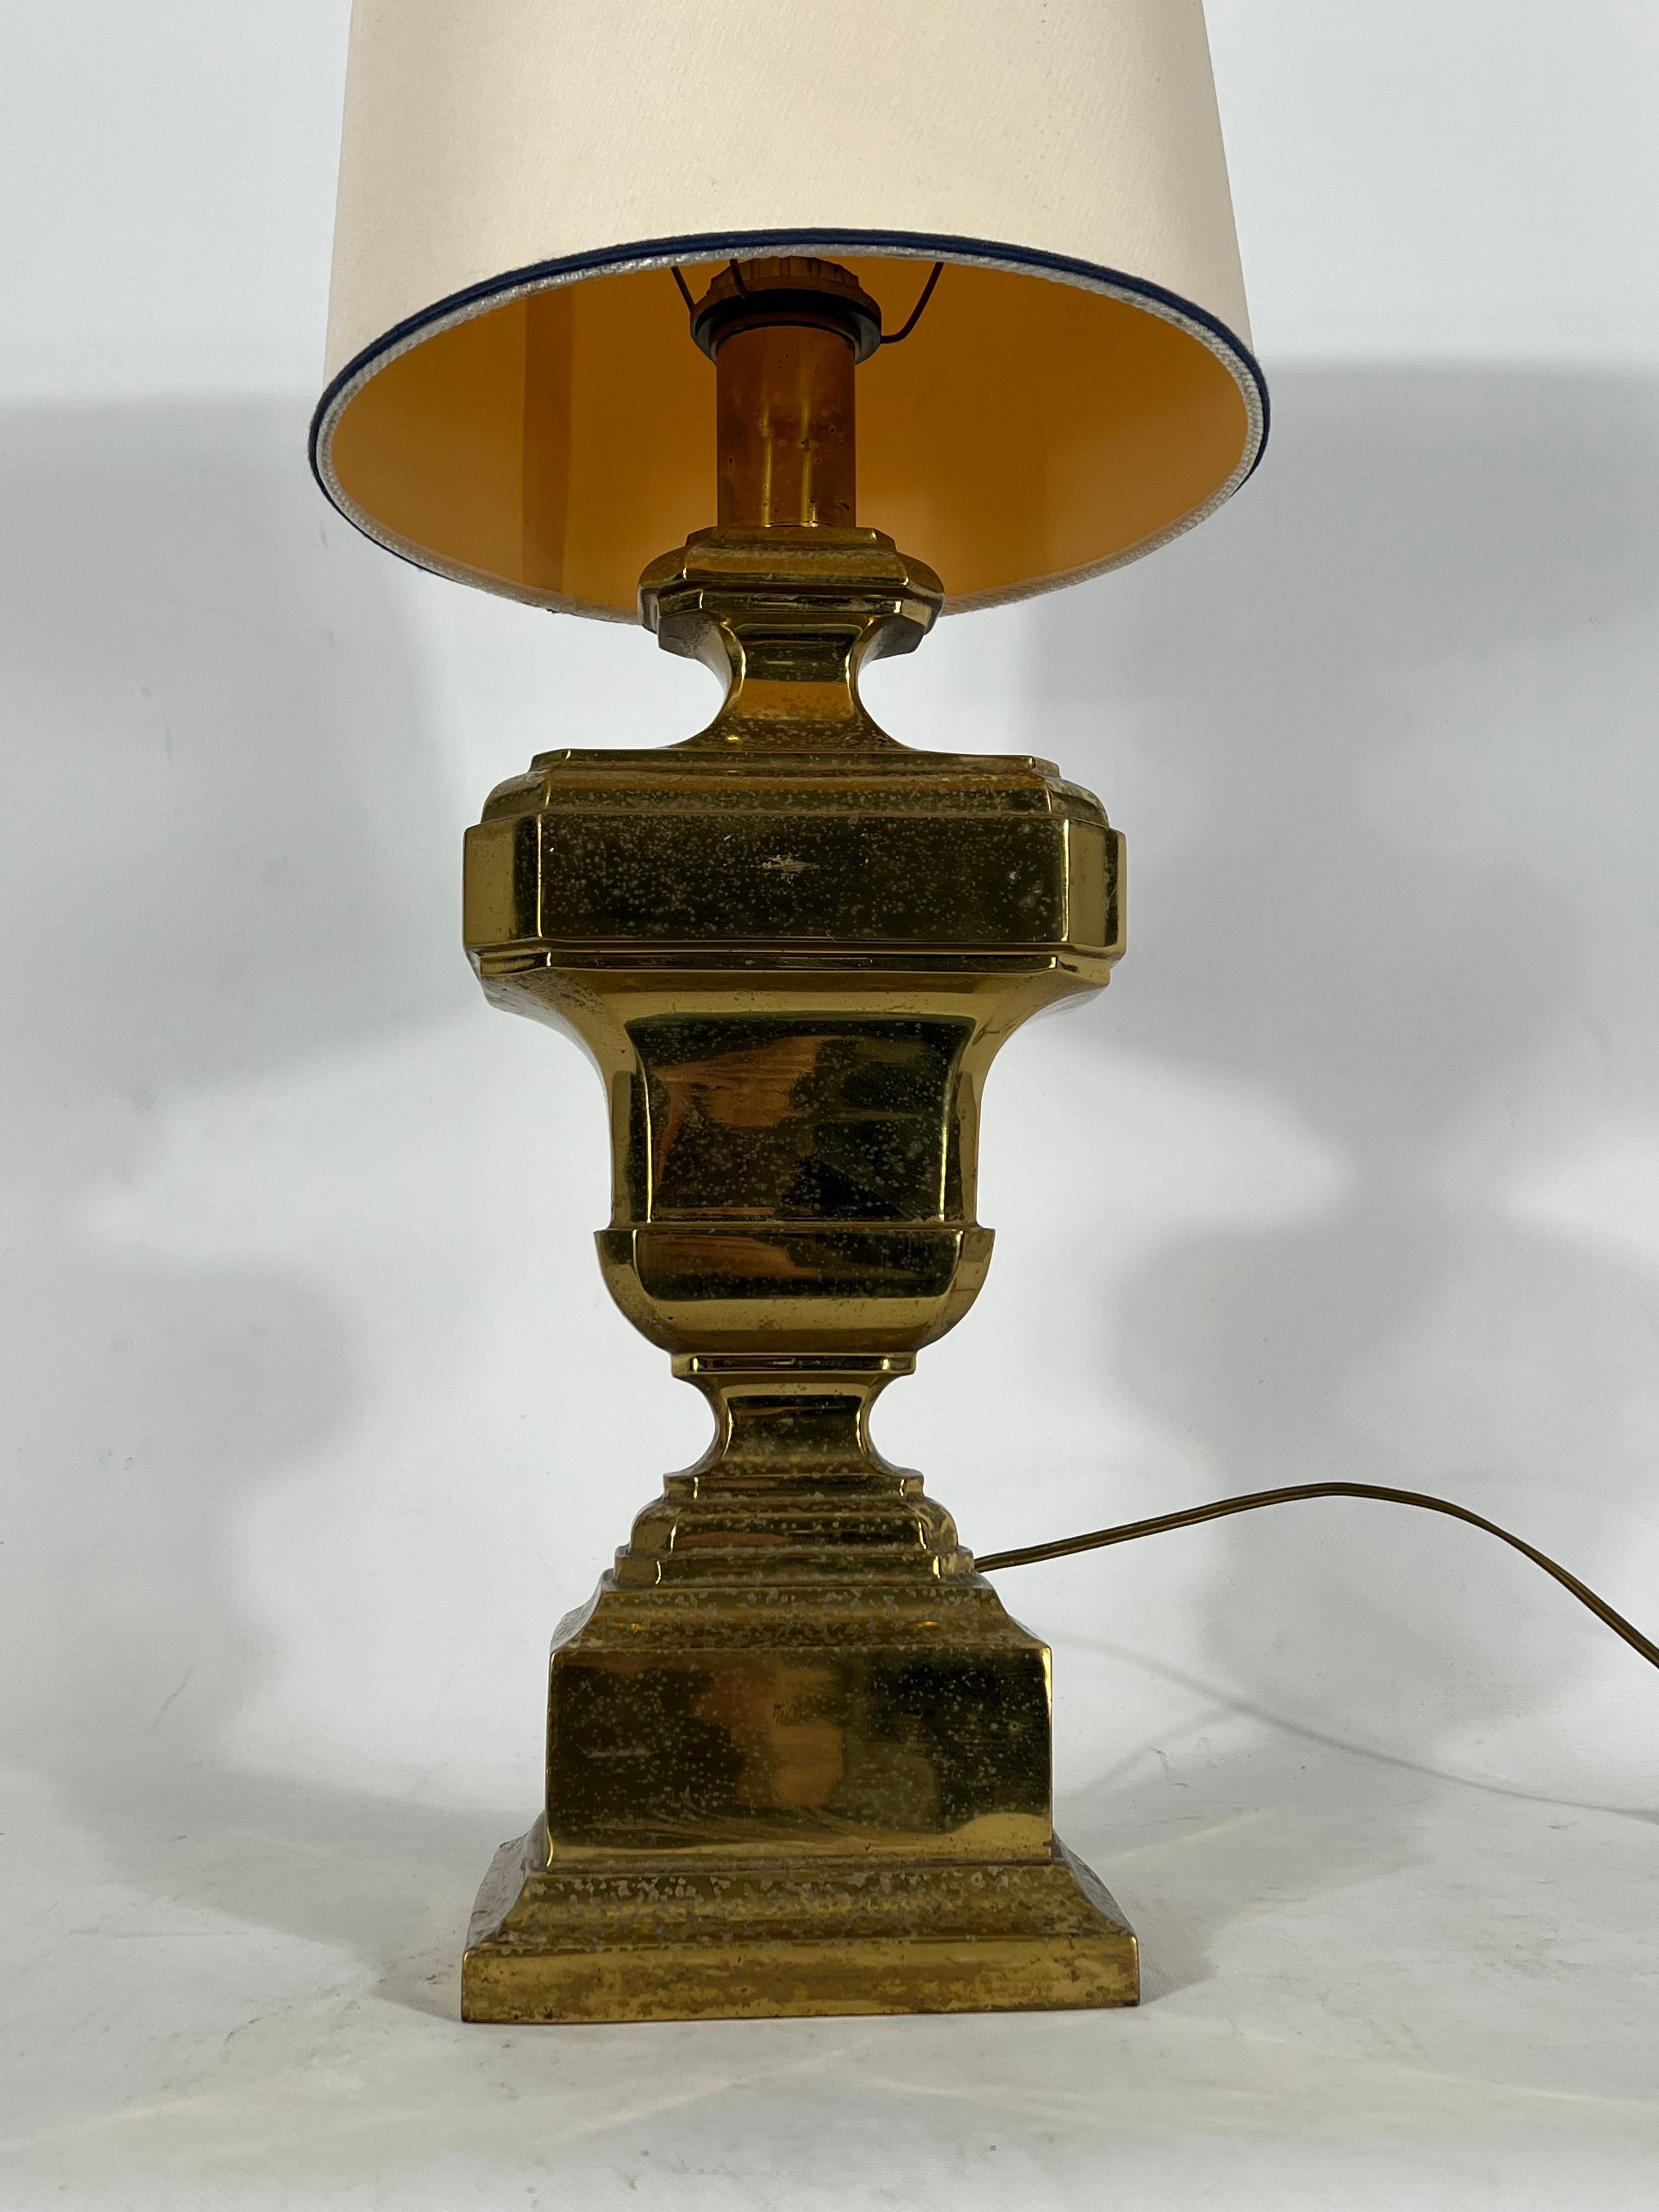 vintage solid brass lamps